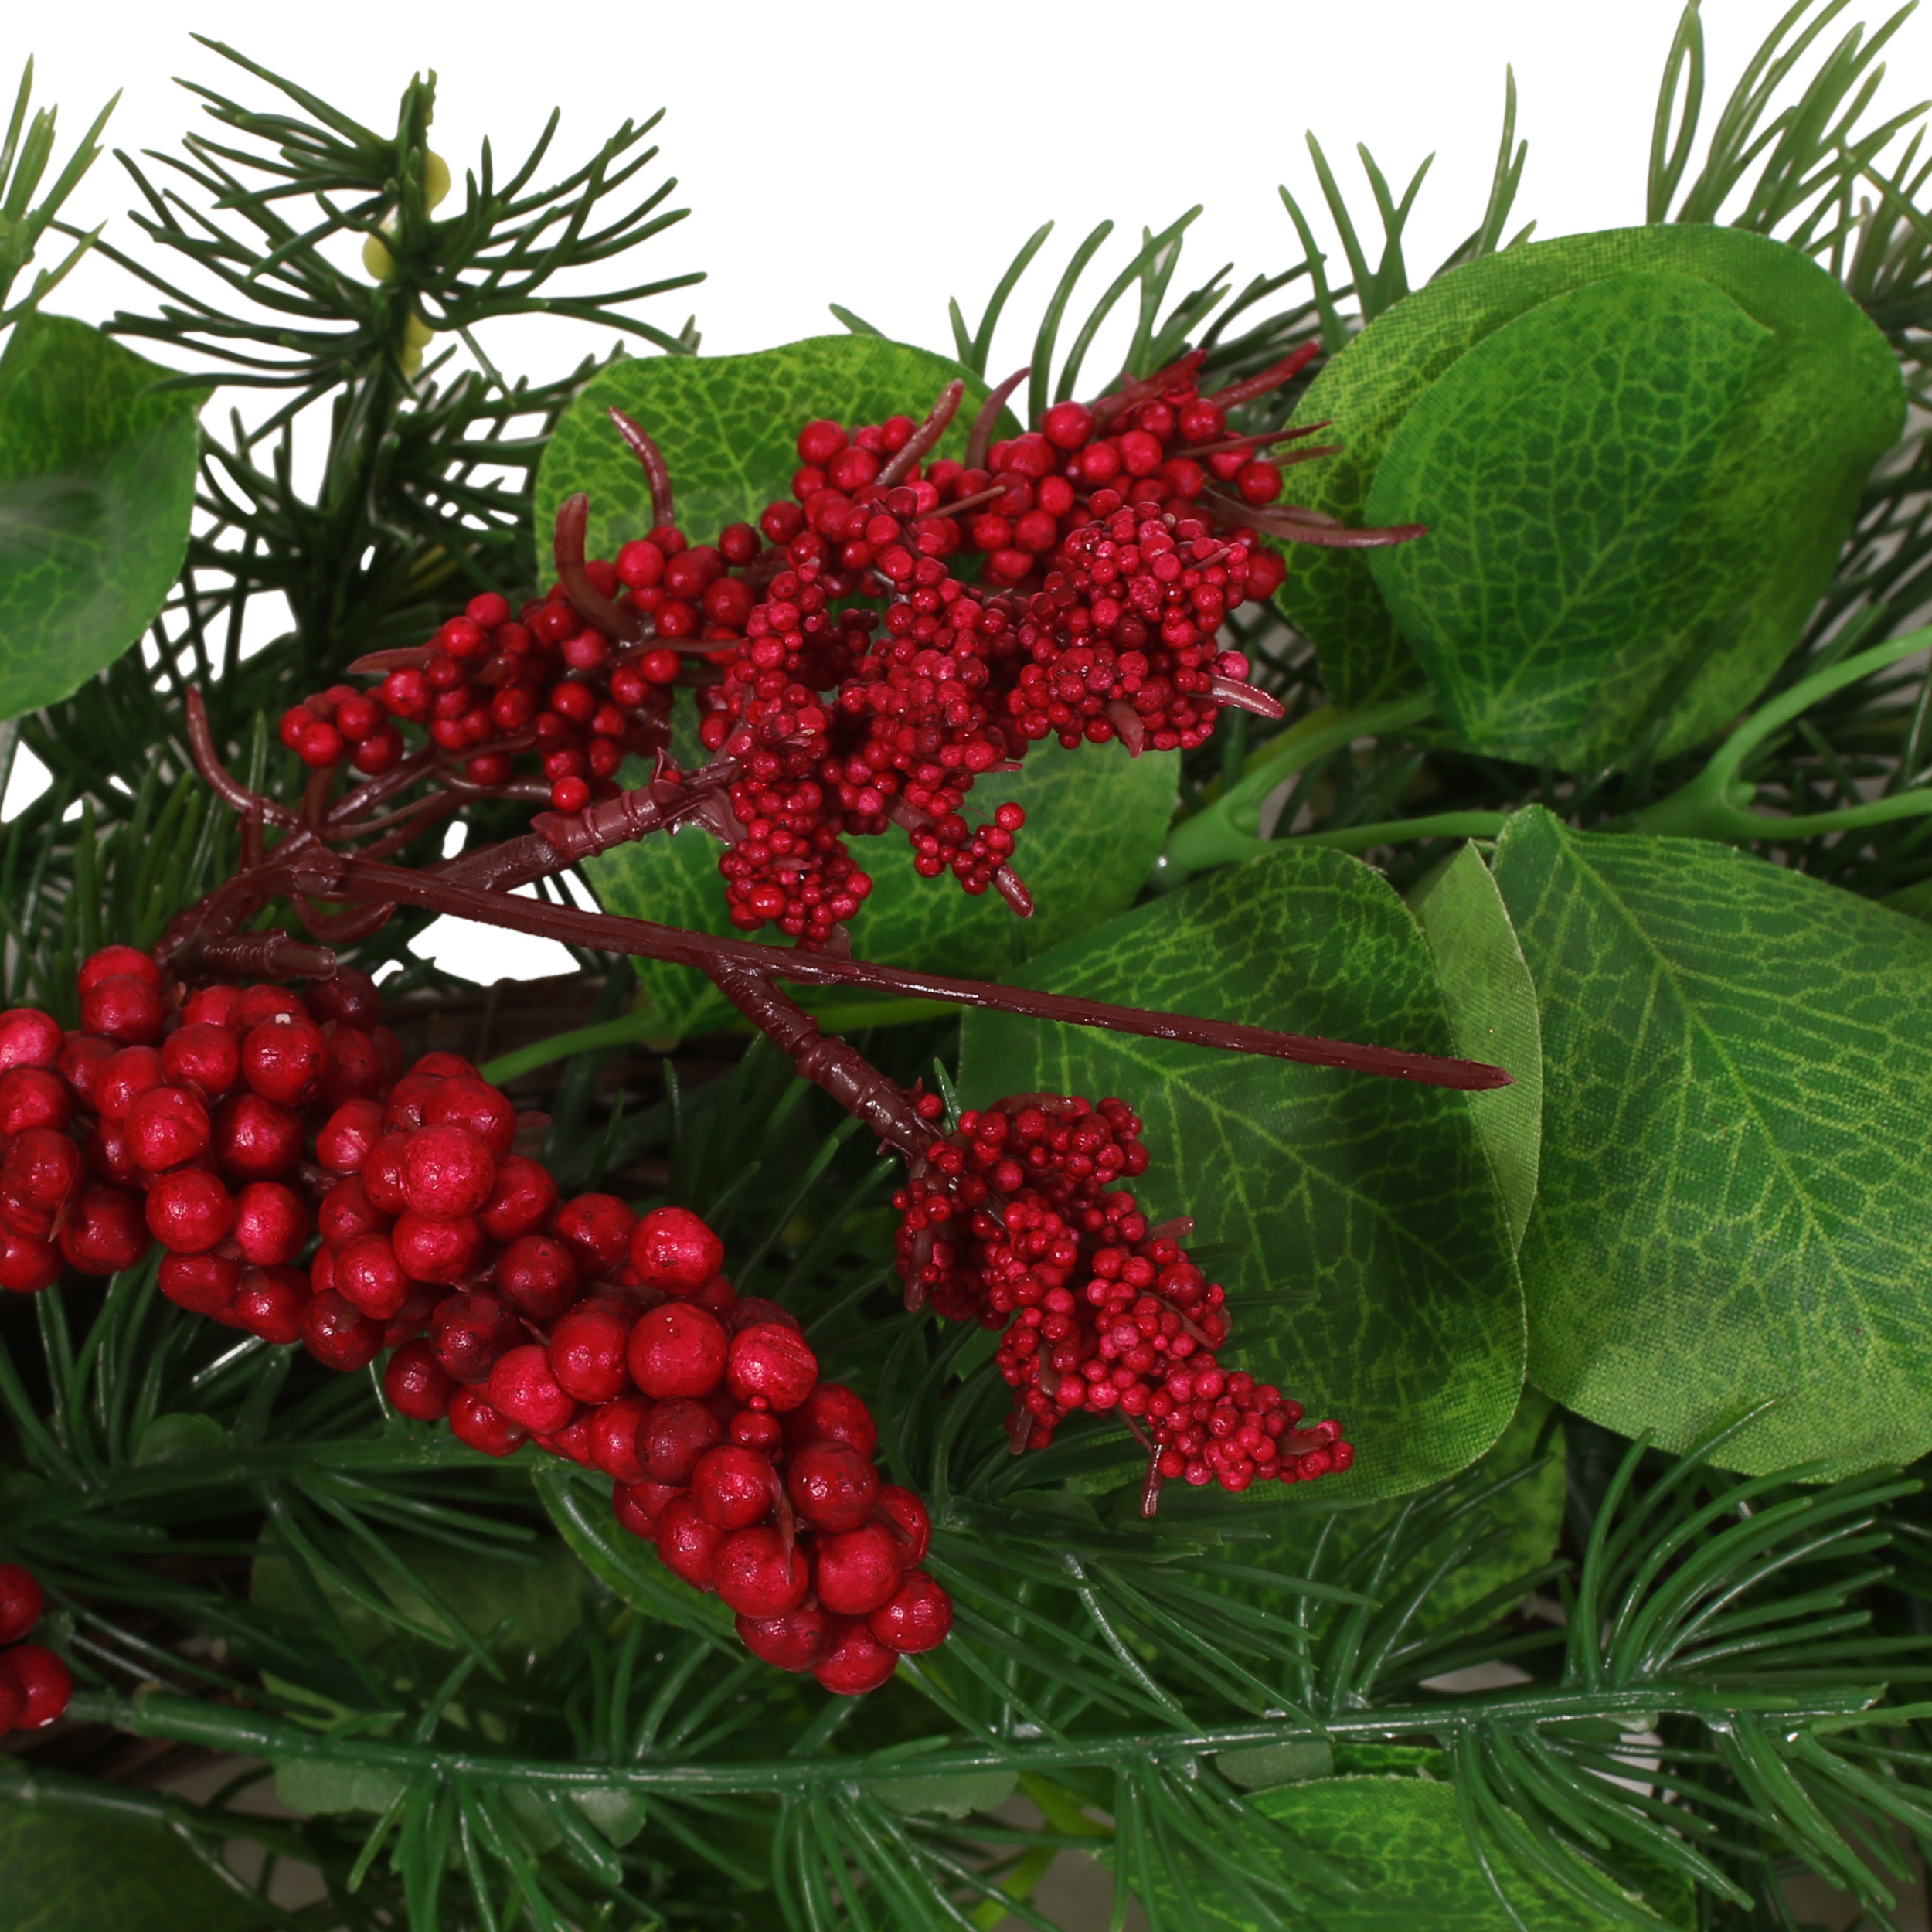 Davian 25.5 Inch Eucalyptus And Pine Artificial Wreath With Berries - Green + Red